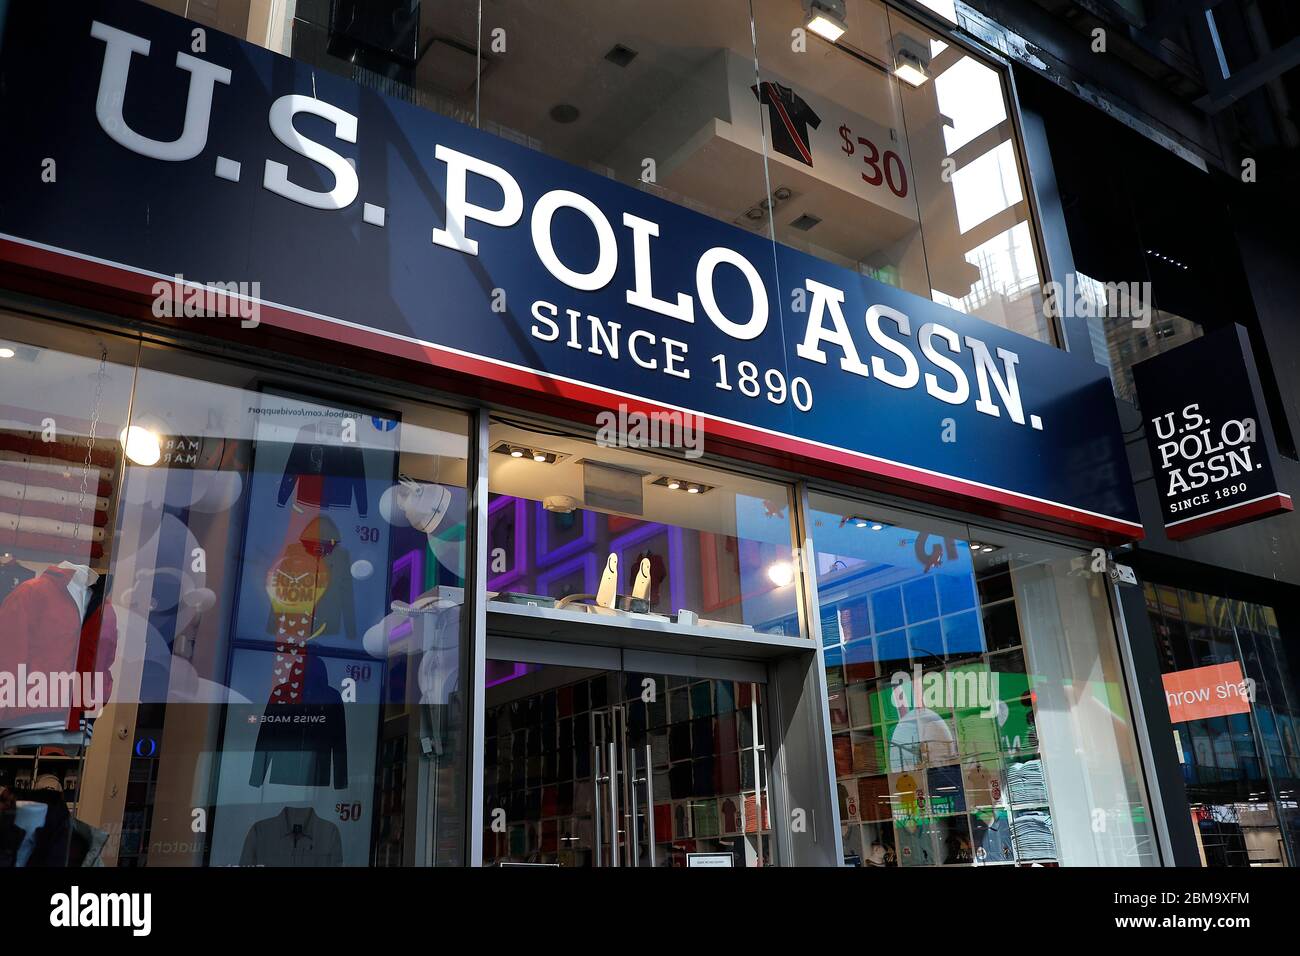 Us polo assn hi-res stock photography and images - Alamy